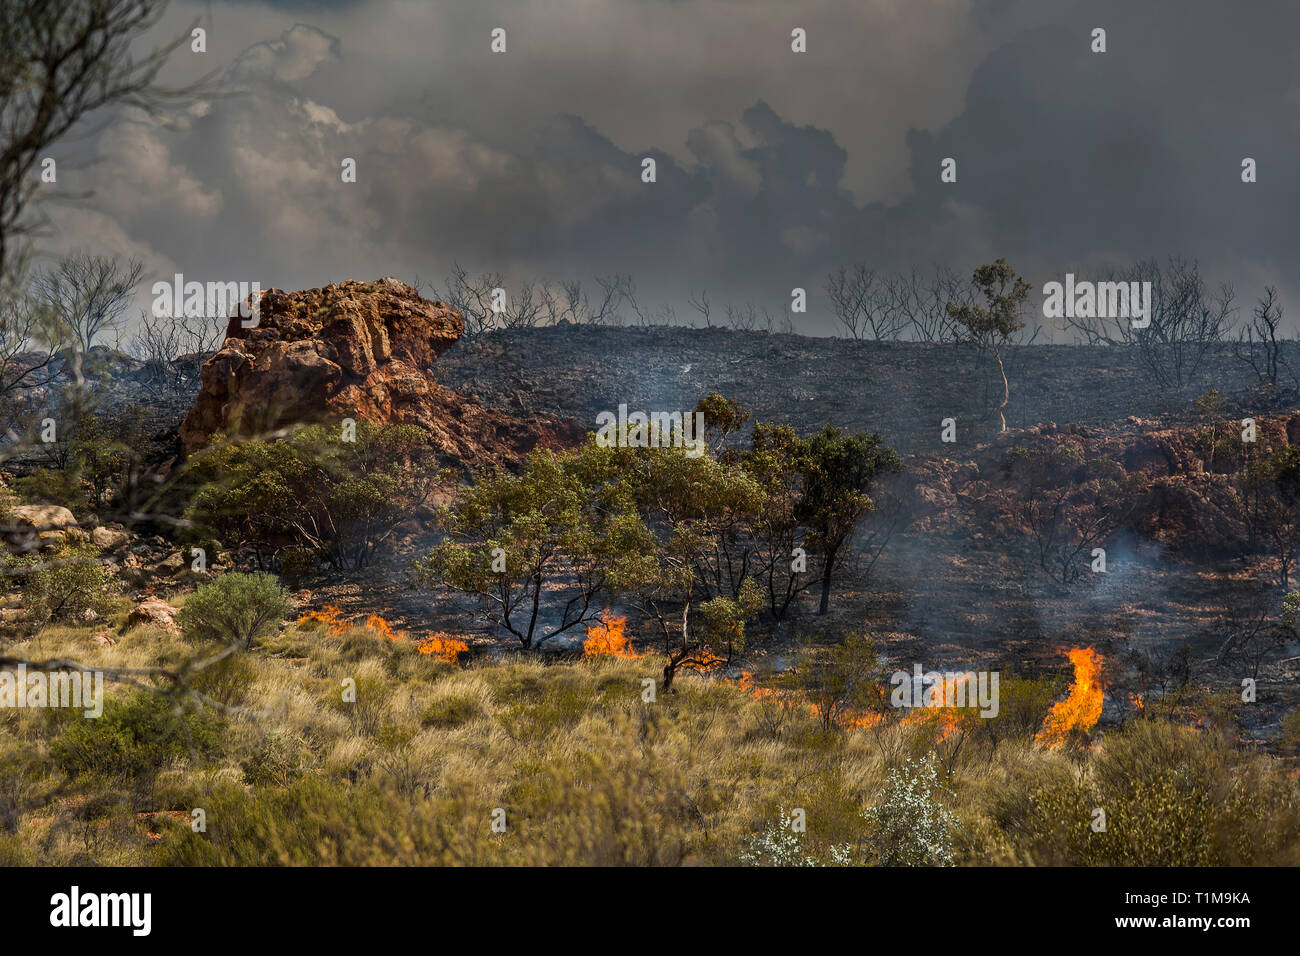 Wildfire burning, East McDonnell Ranges, Alice Springs, Northern Territory, Australia Stock Photo